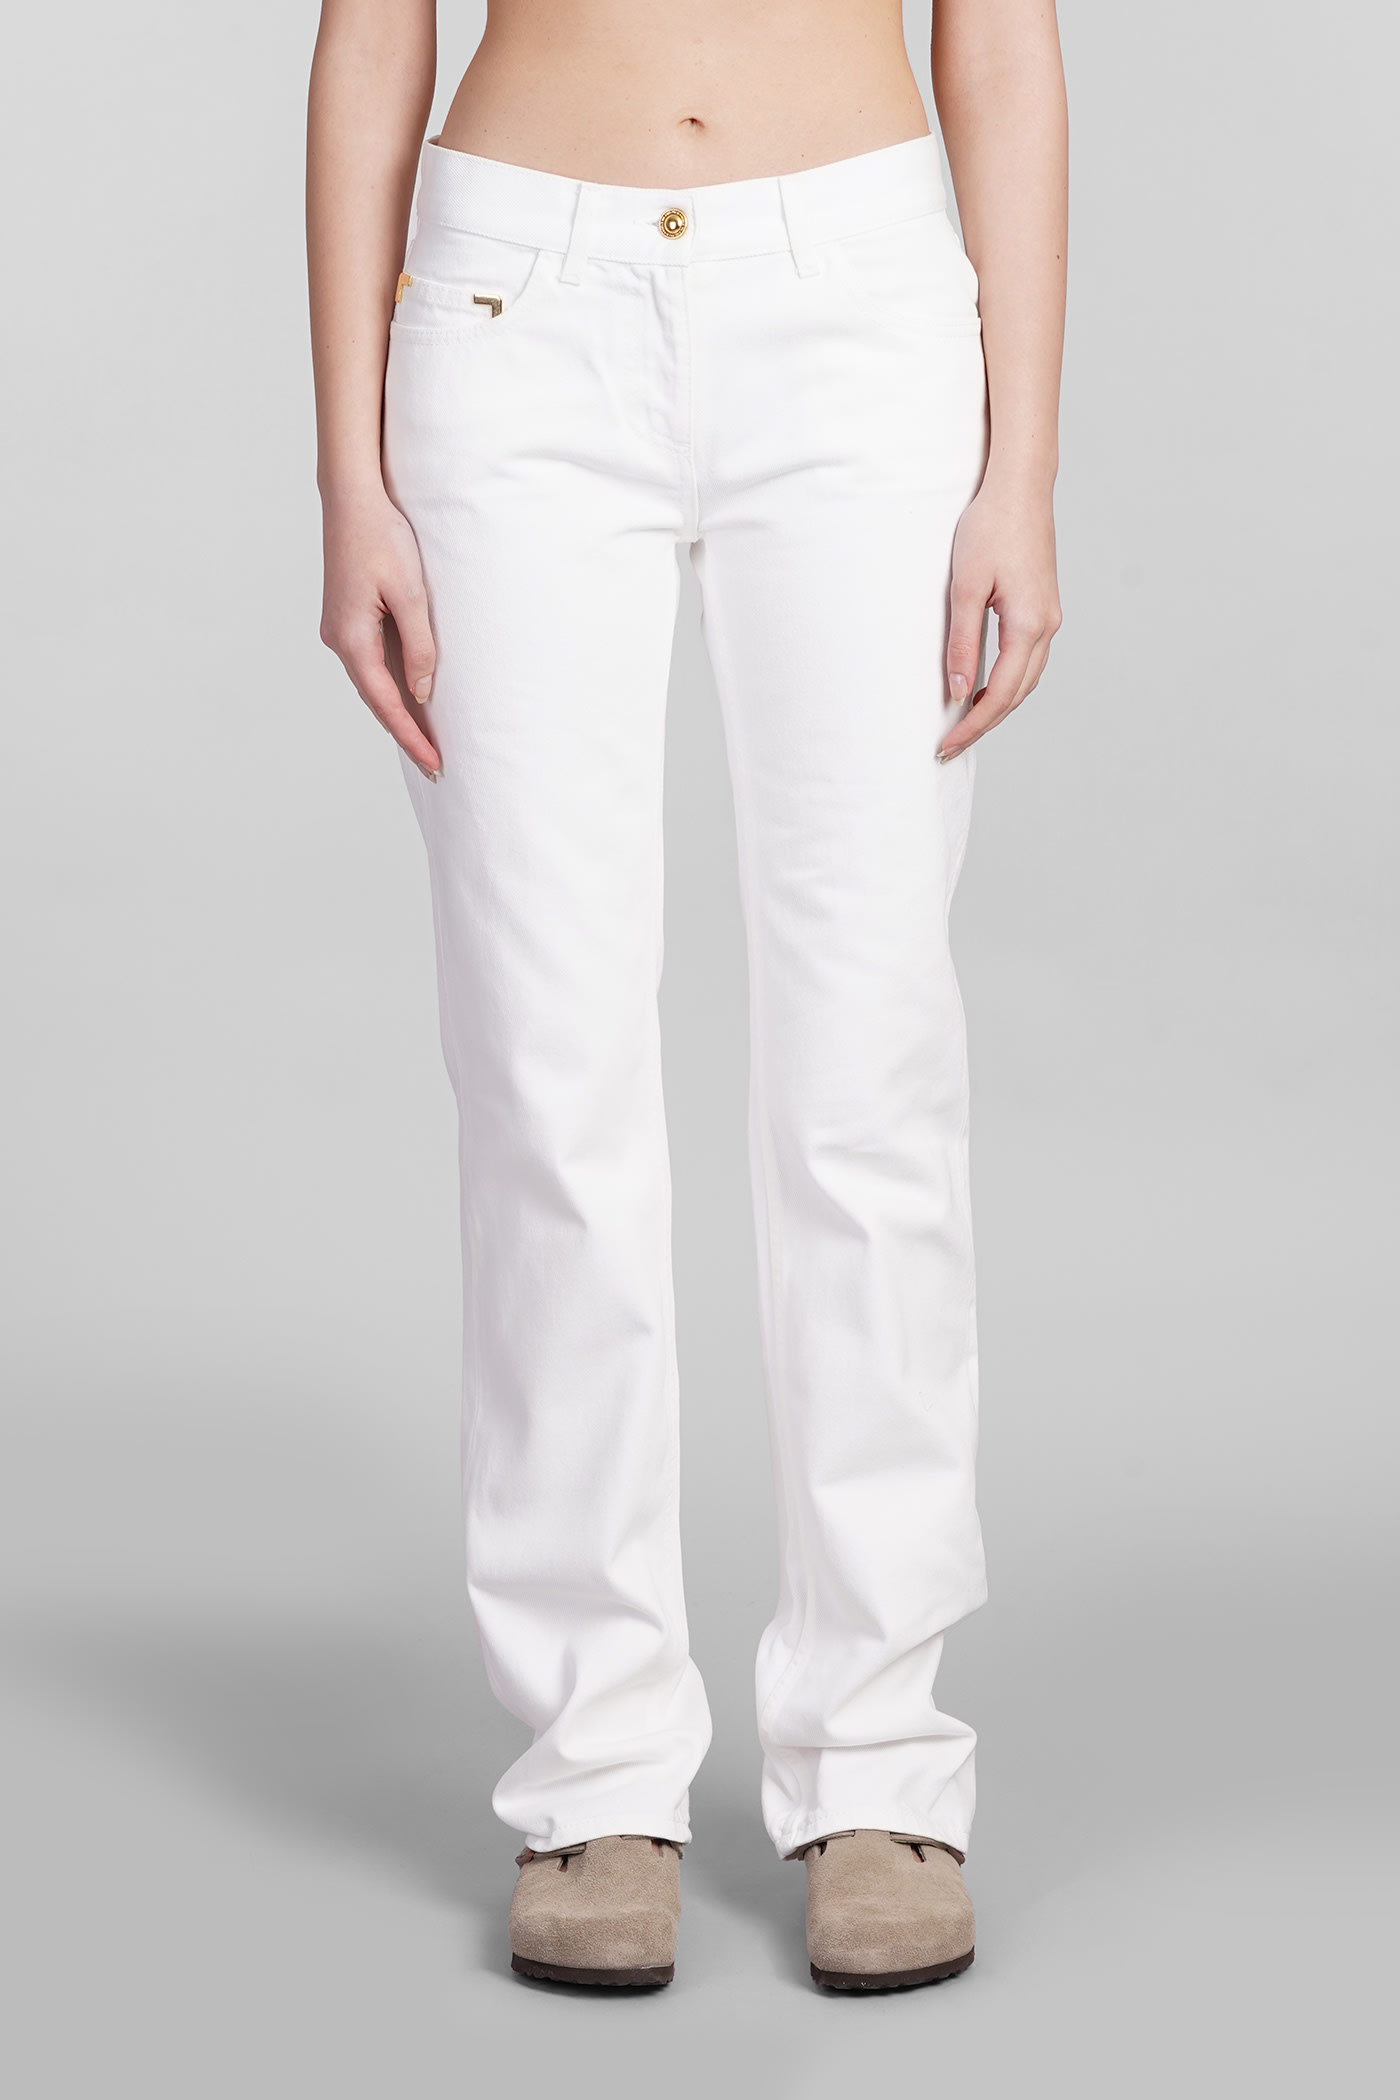 Palm Angels Jeans In White Cotton